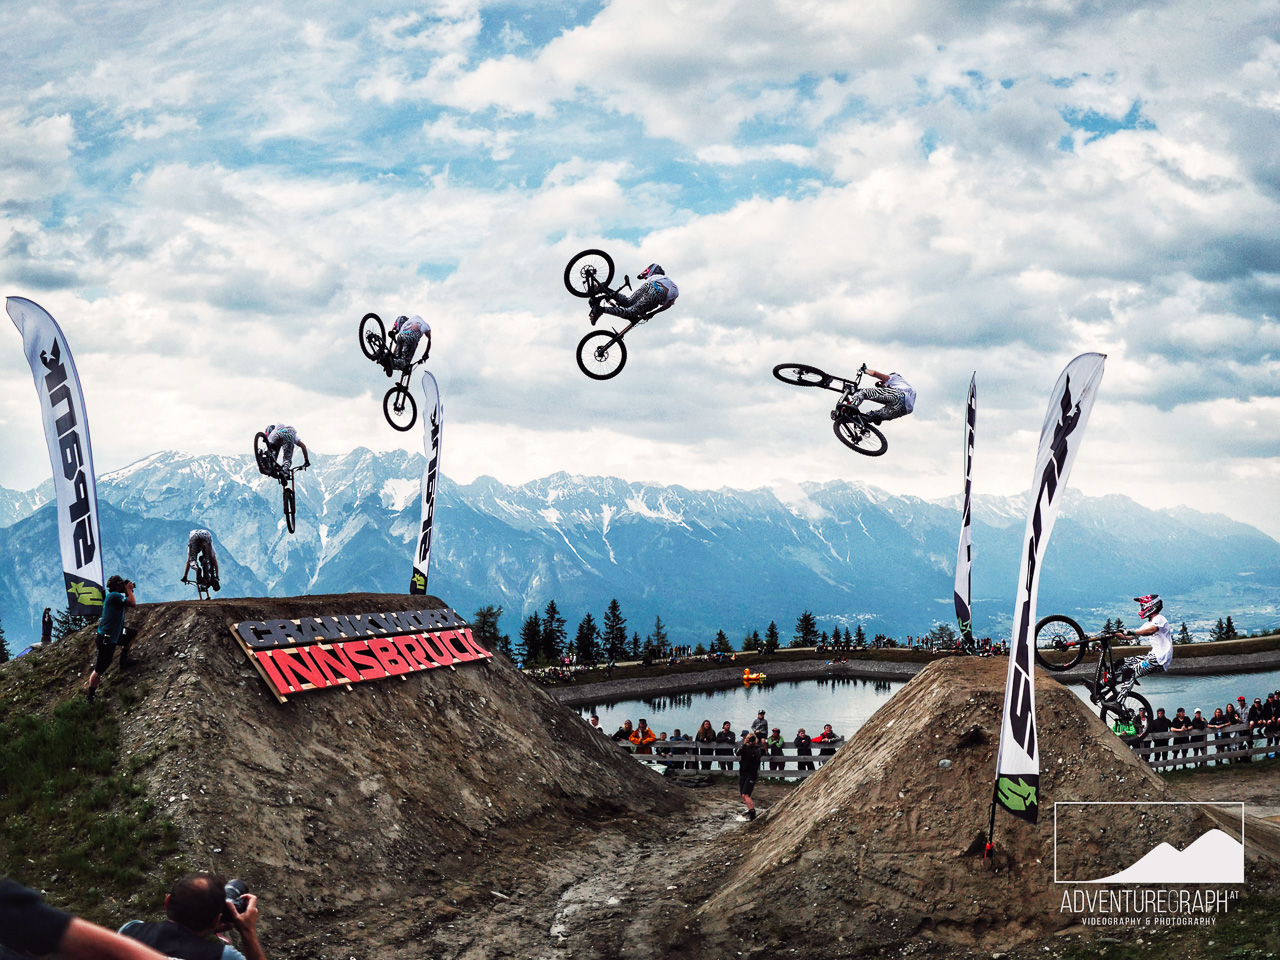 Huge jump (whip) on downhill bike at Crankworx Innsbruck event by Kaos Seagrave.